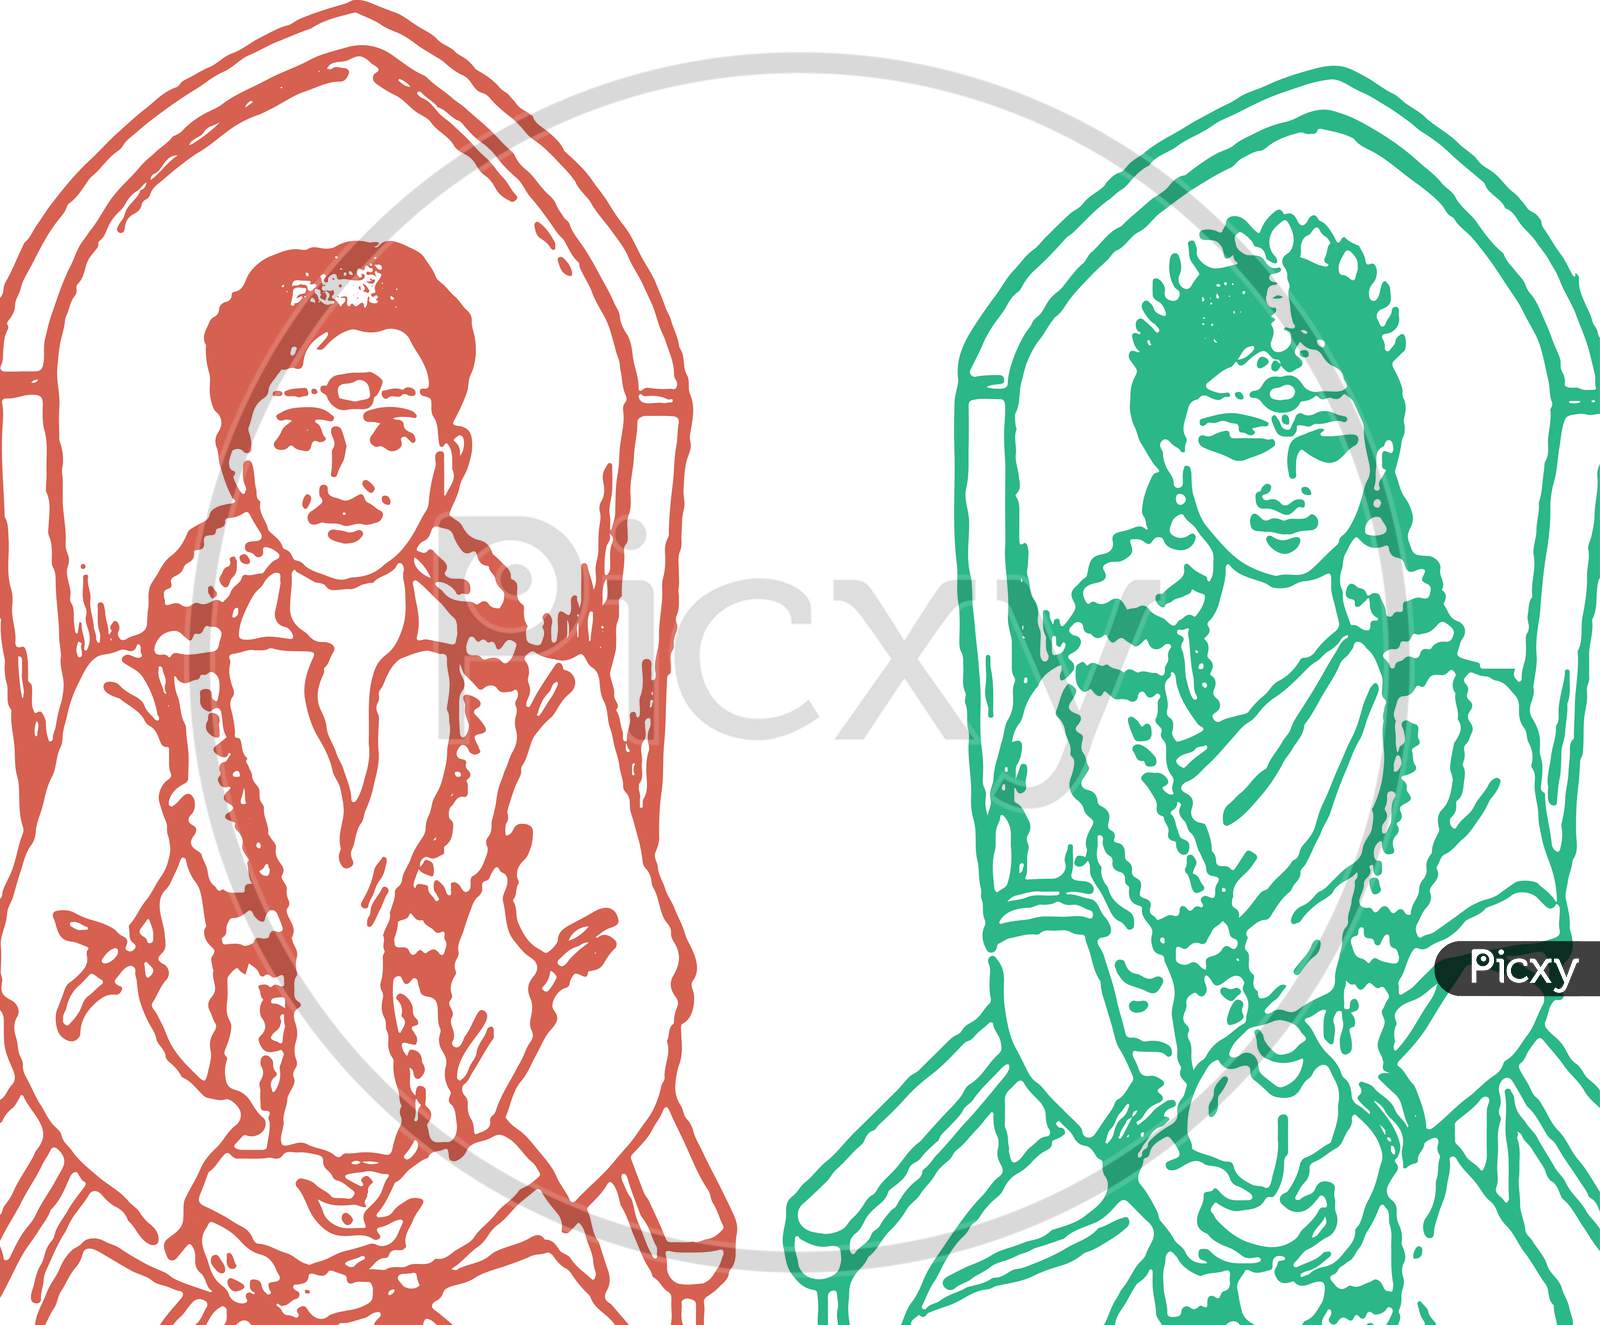 Sketch Of Bride And Groom Sitting In A Chair During Marriage. Vector Outline Editable Illustration